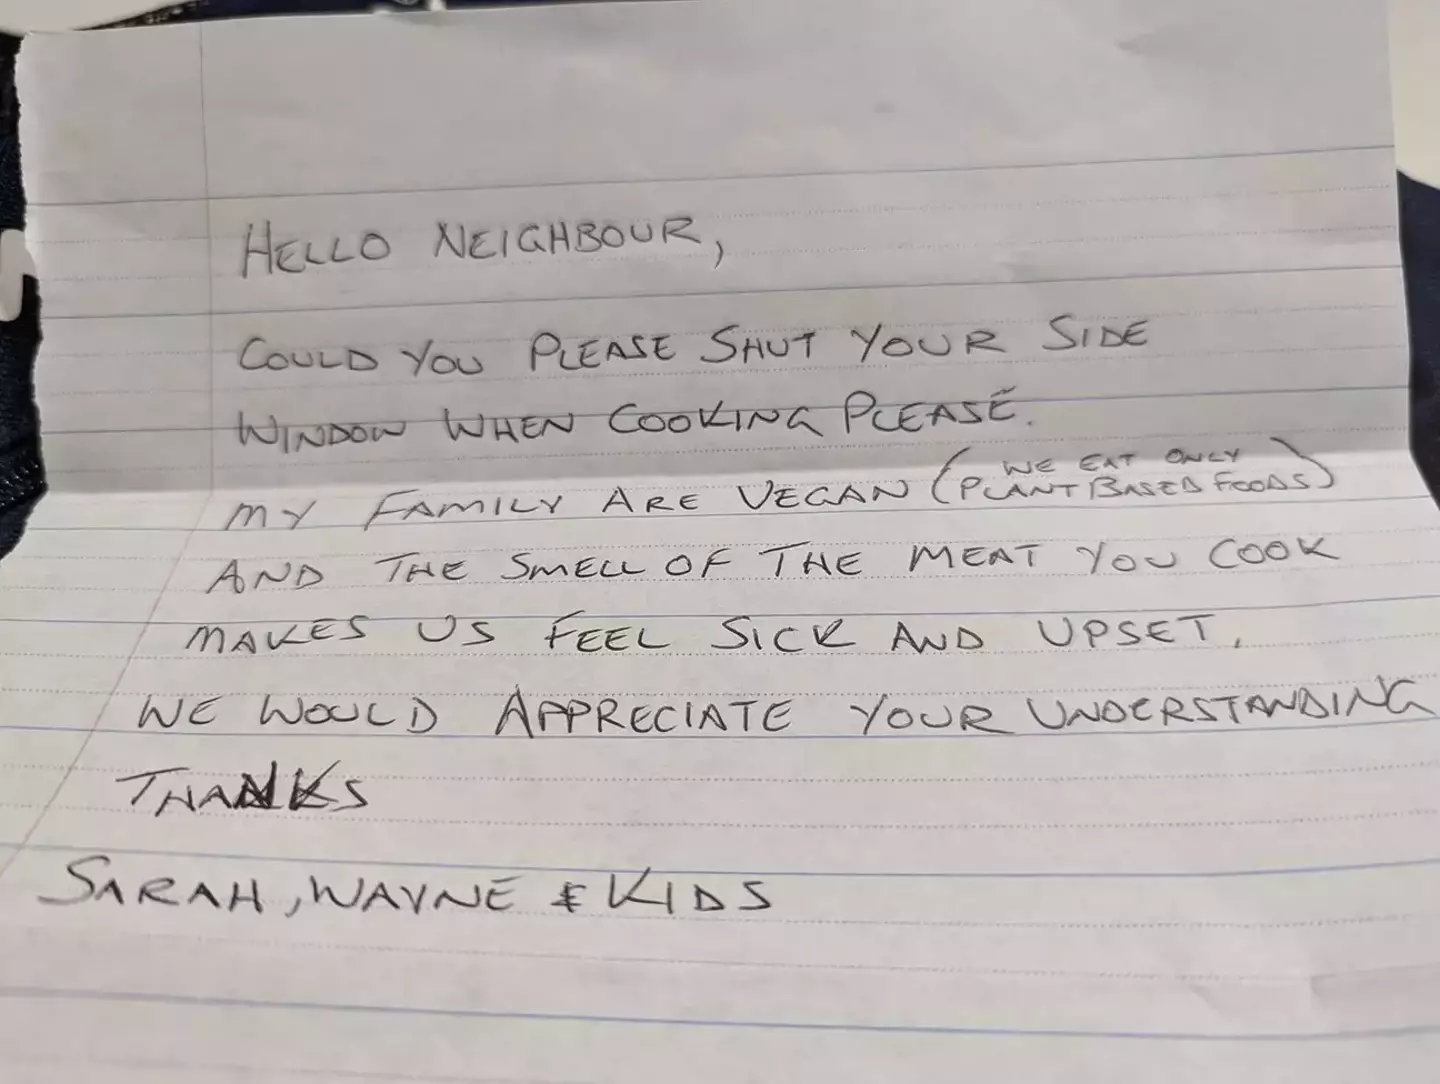 The first letter sent by the plant-based neighbour.